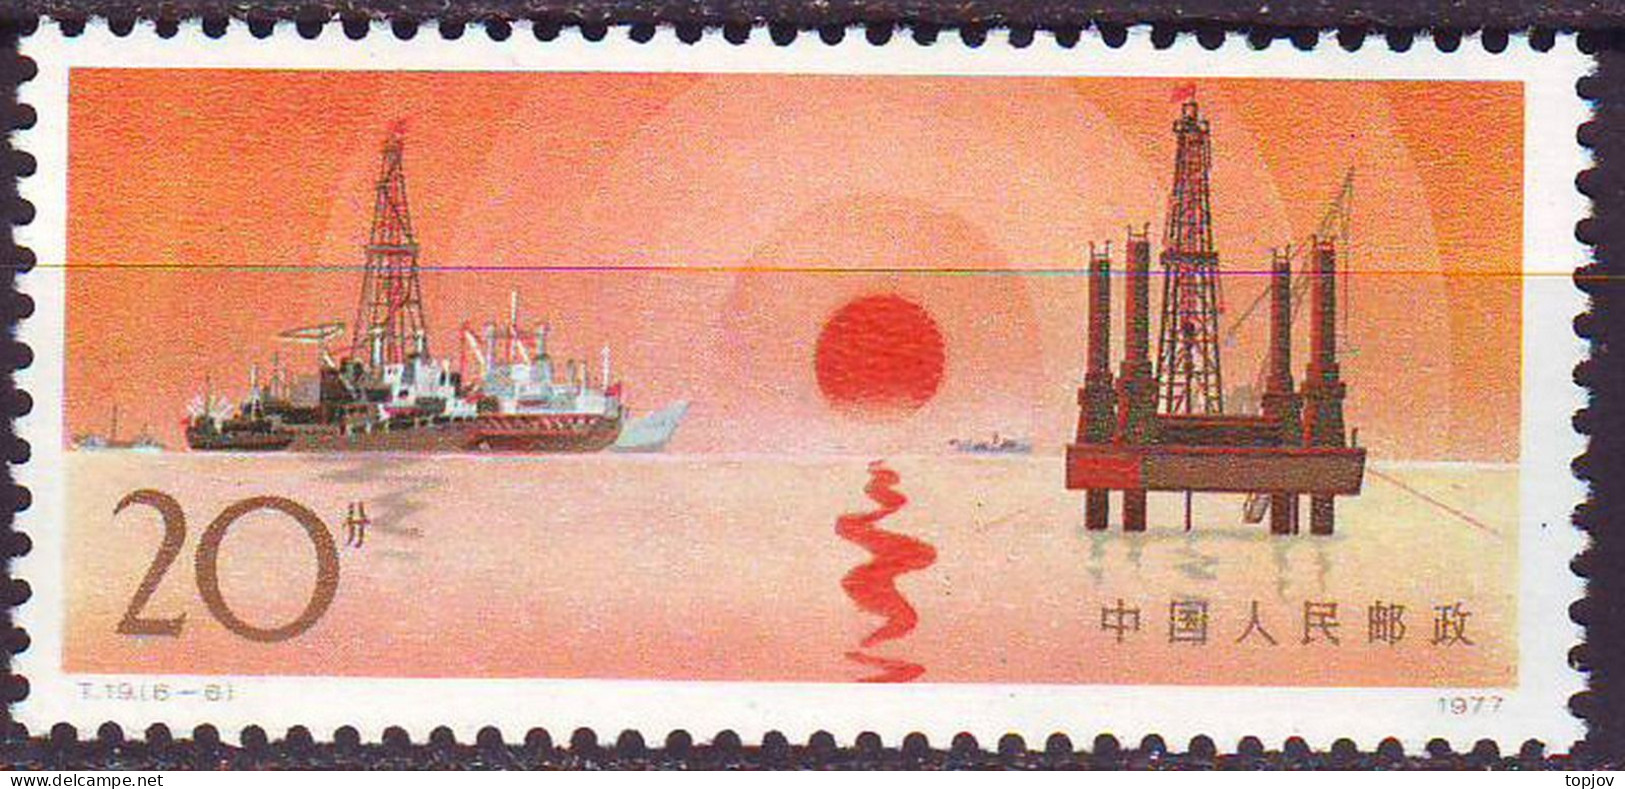 CHINA - T19 - OIL PLATFORM FROM SEA - **MNH - 1977 - Oil